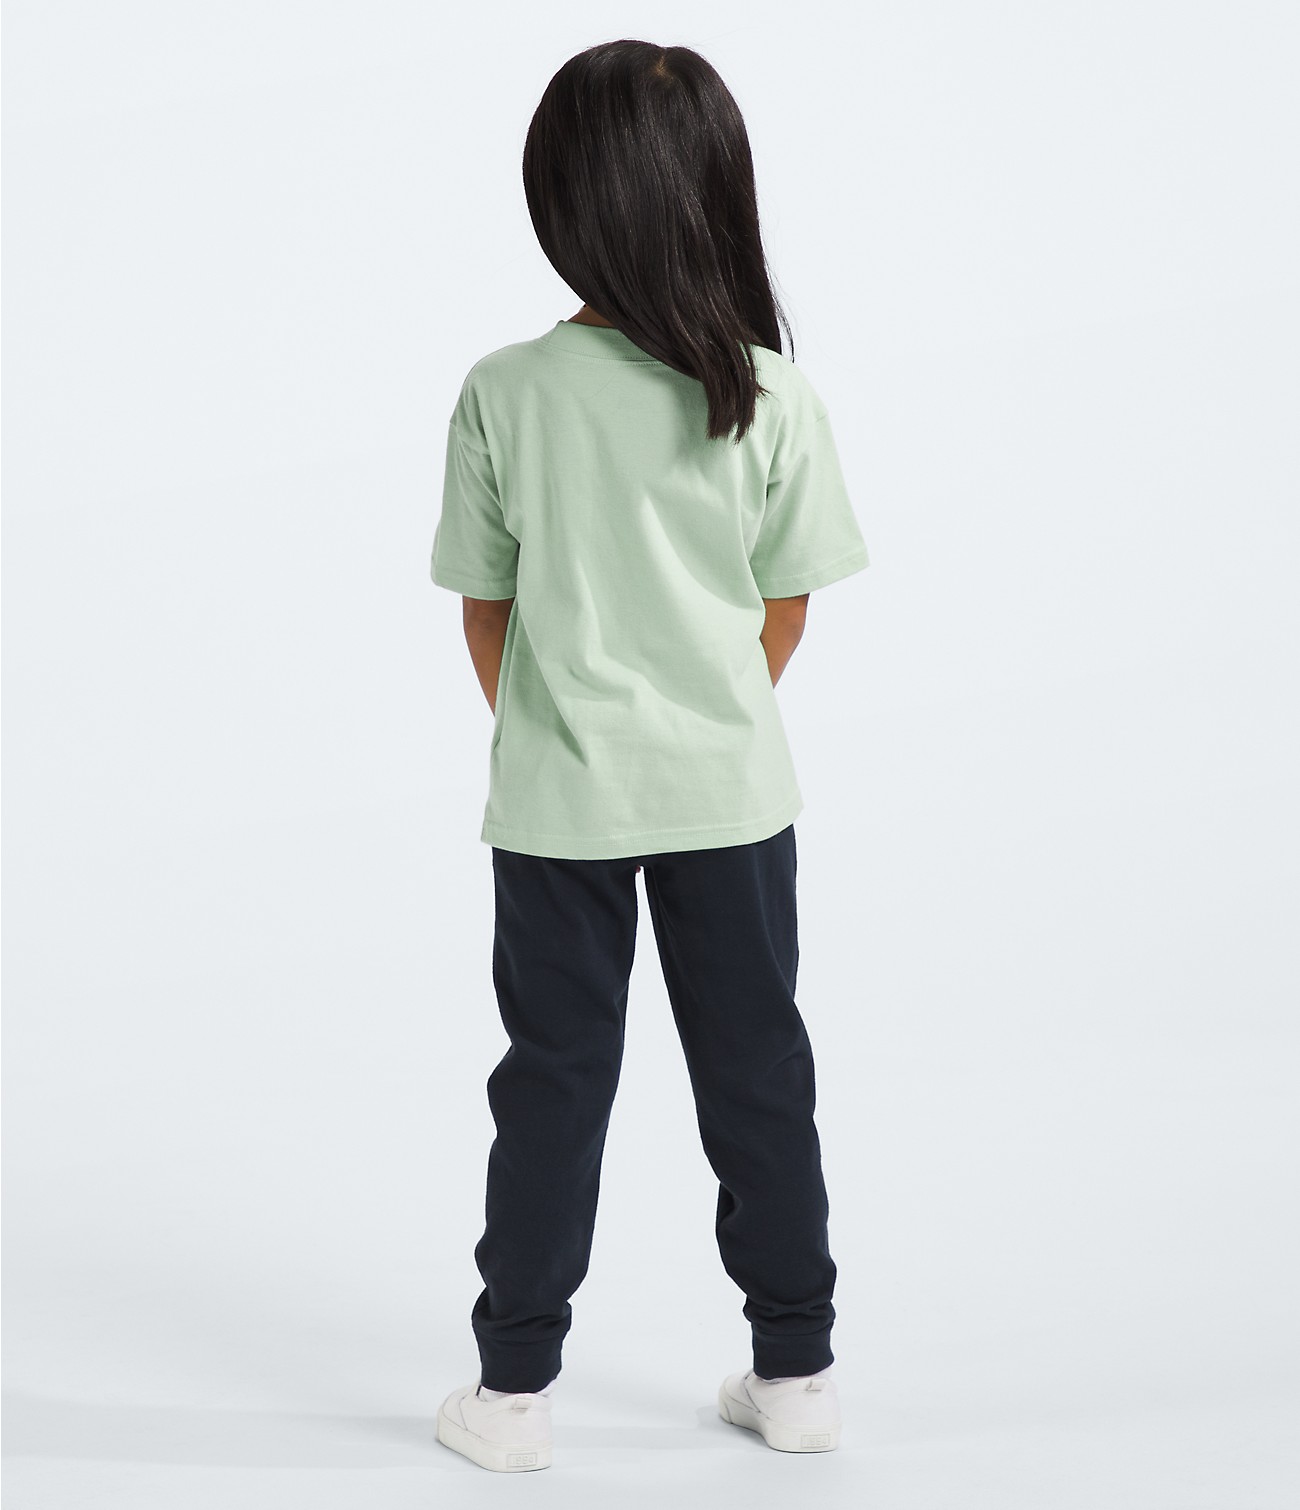 Kids’ Short-Sleeve Graphic Tee | The North Face